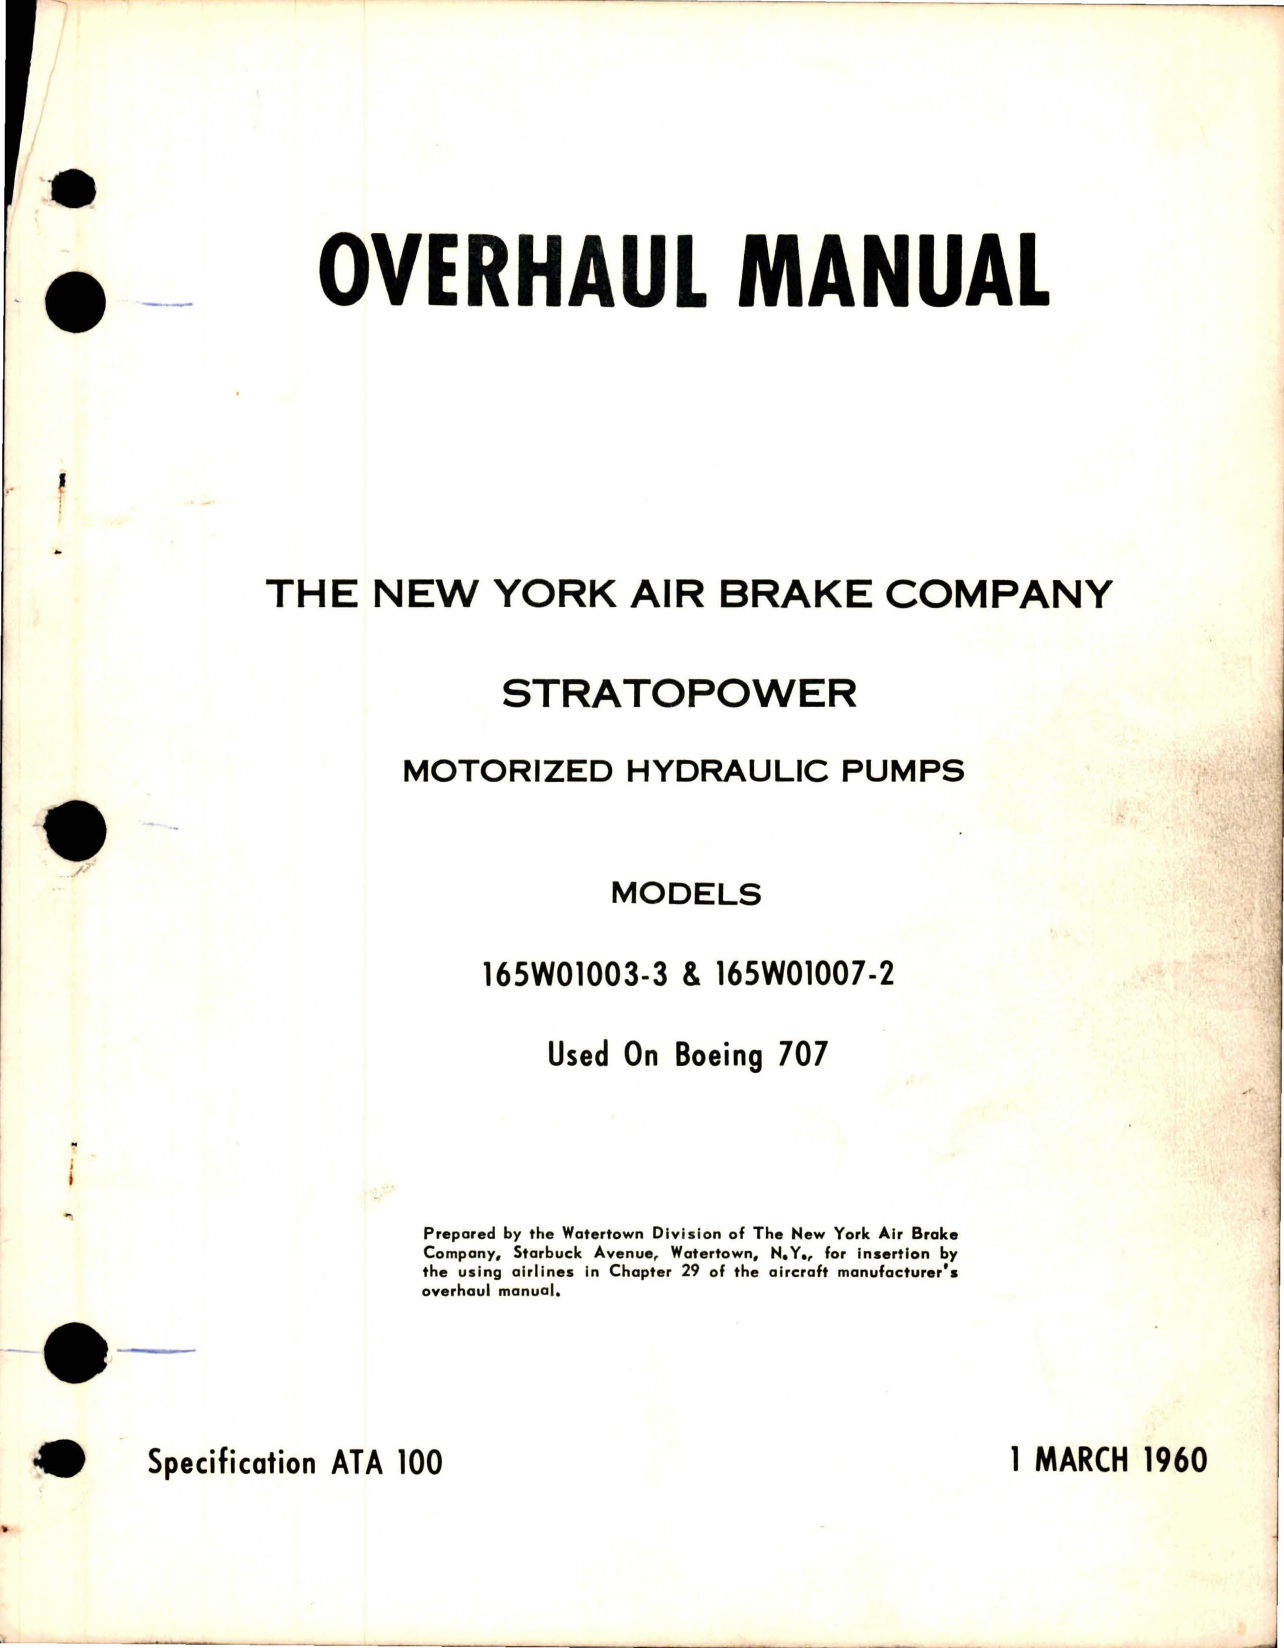 Sample page 1 from AirCorps Library document: Overhaul Manual for Stratopower Motorized Hydraulic Pumps - Models 165W01003-3 and 165W01007-2 